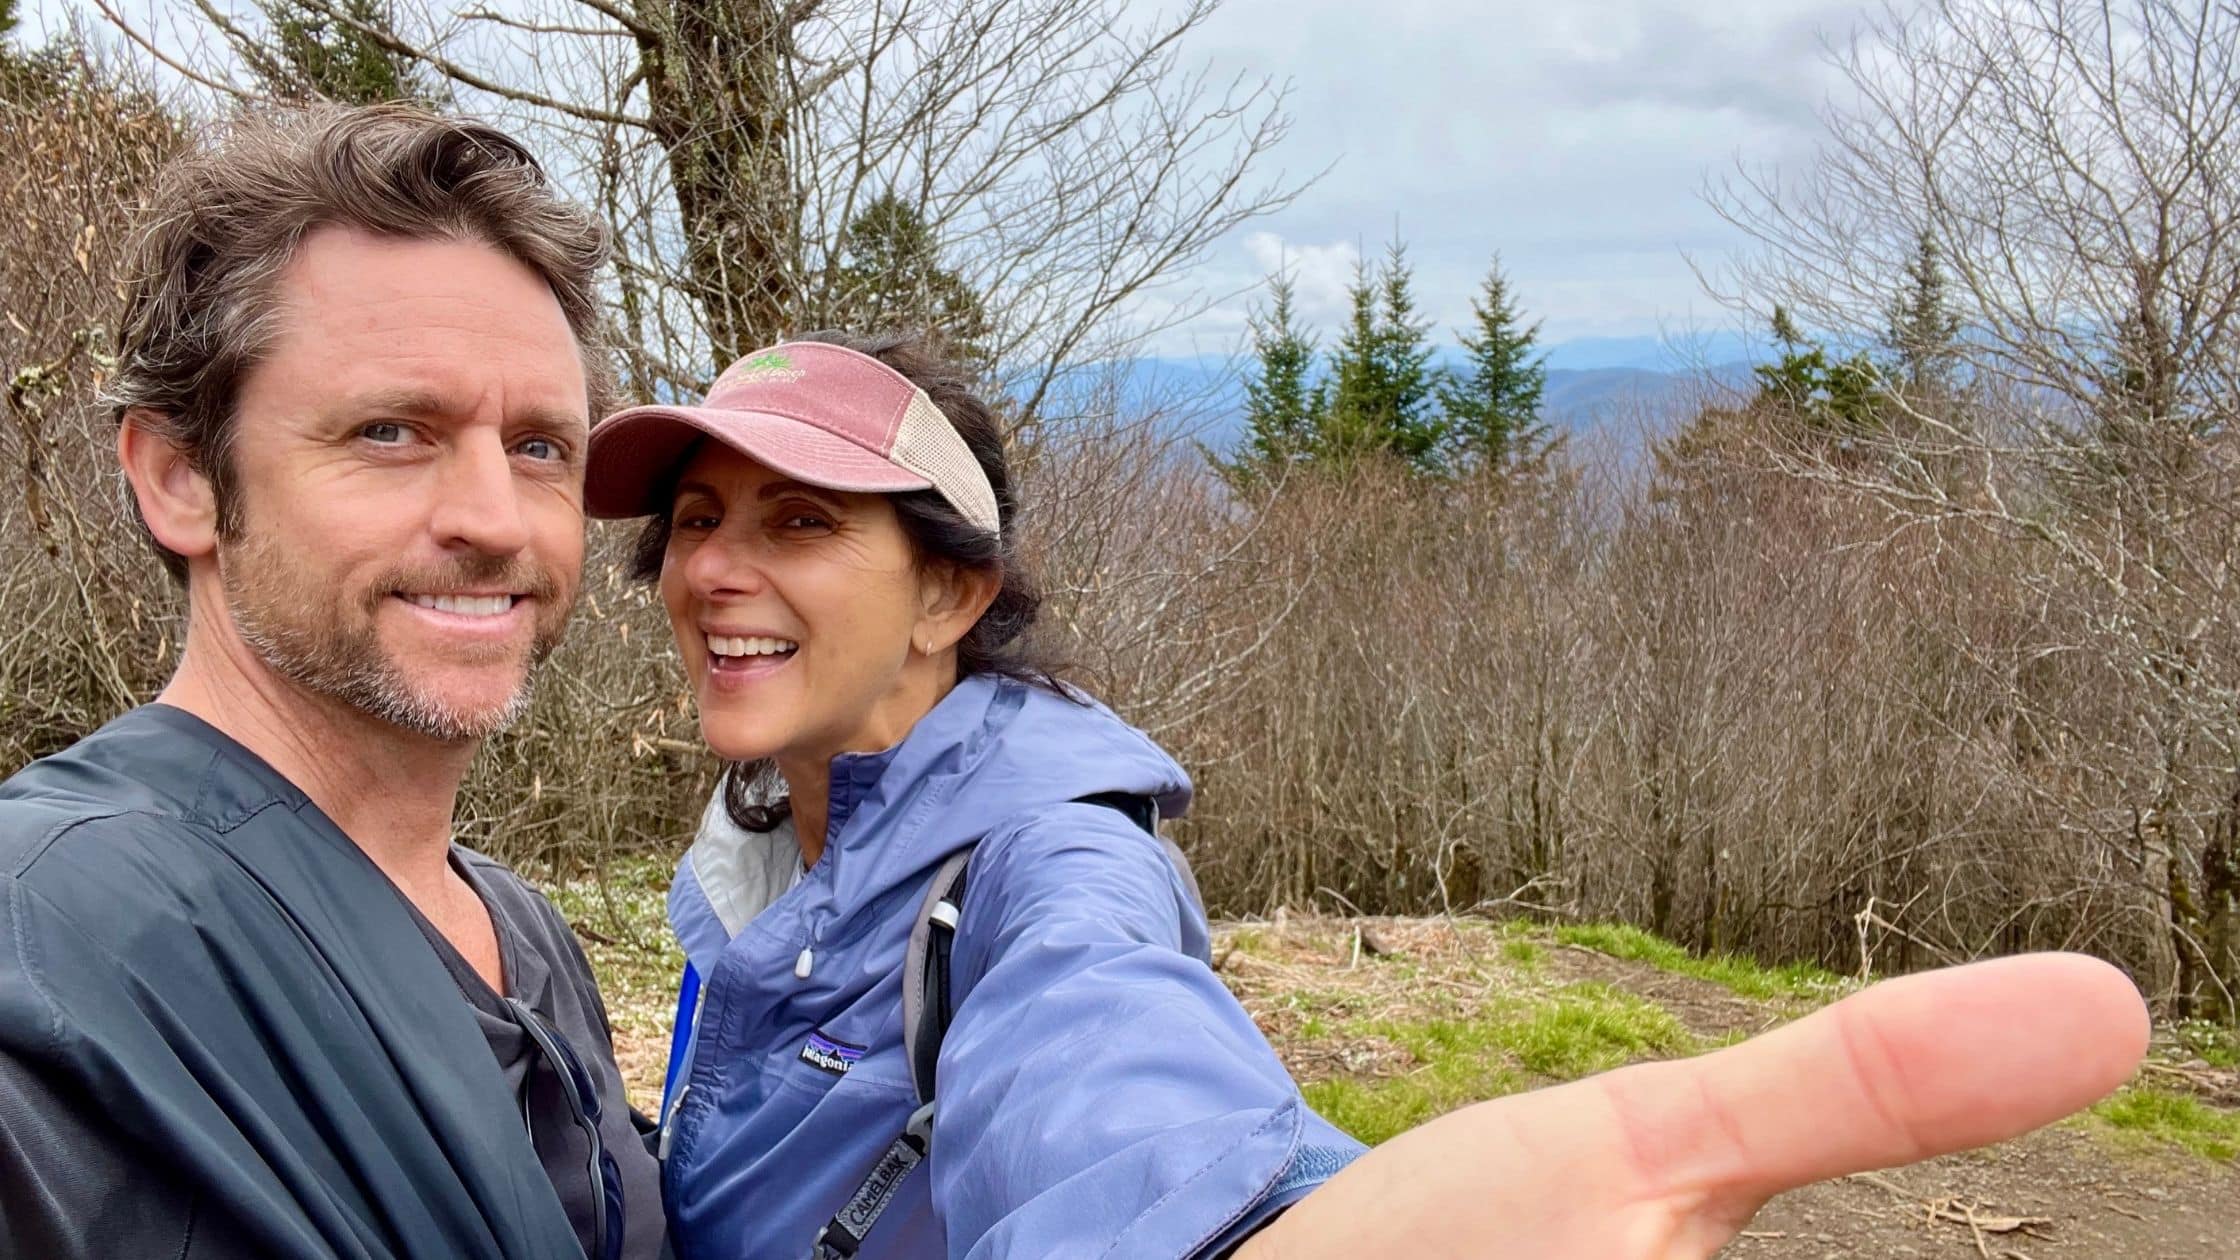 What The Spring Flowers Taught Me on the Appalachian Trail